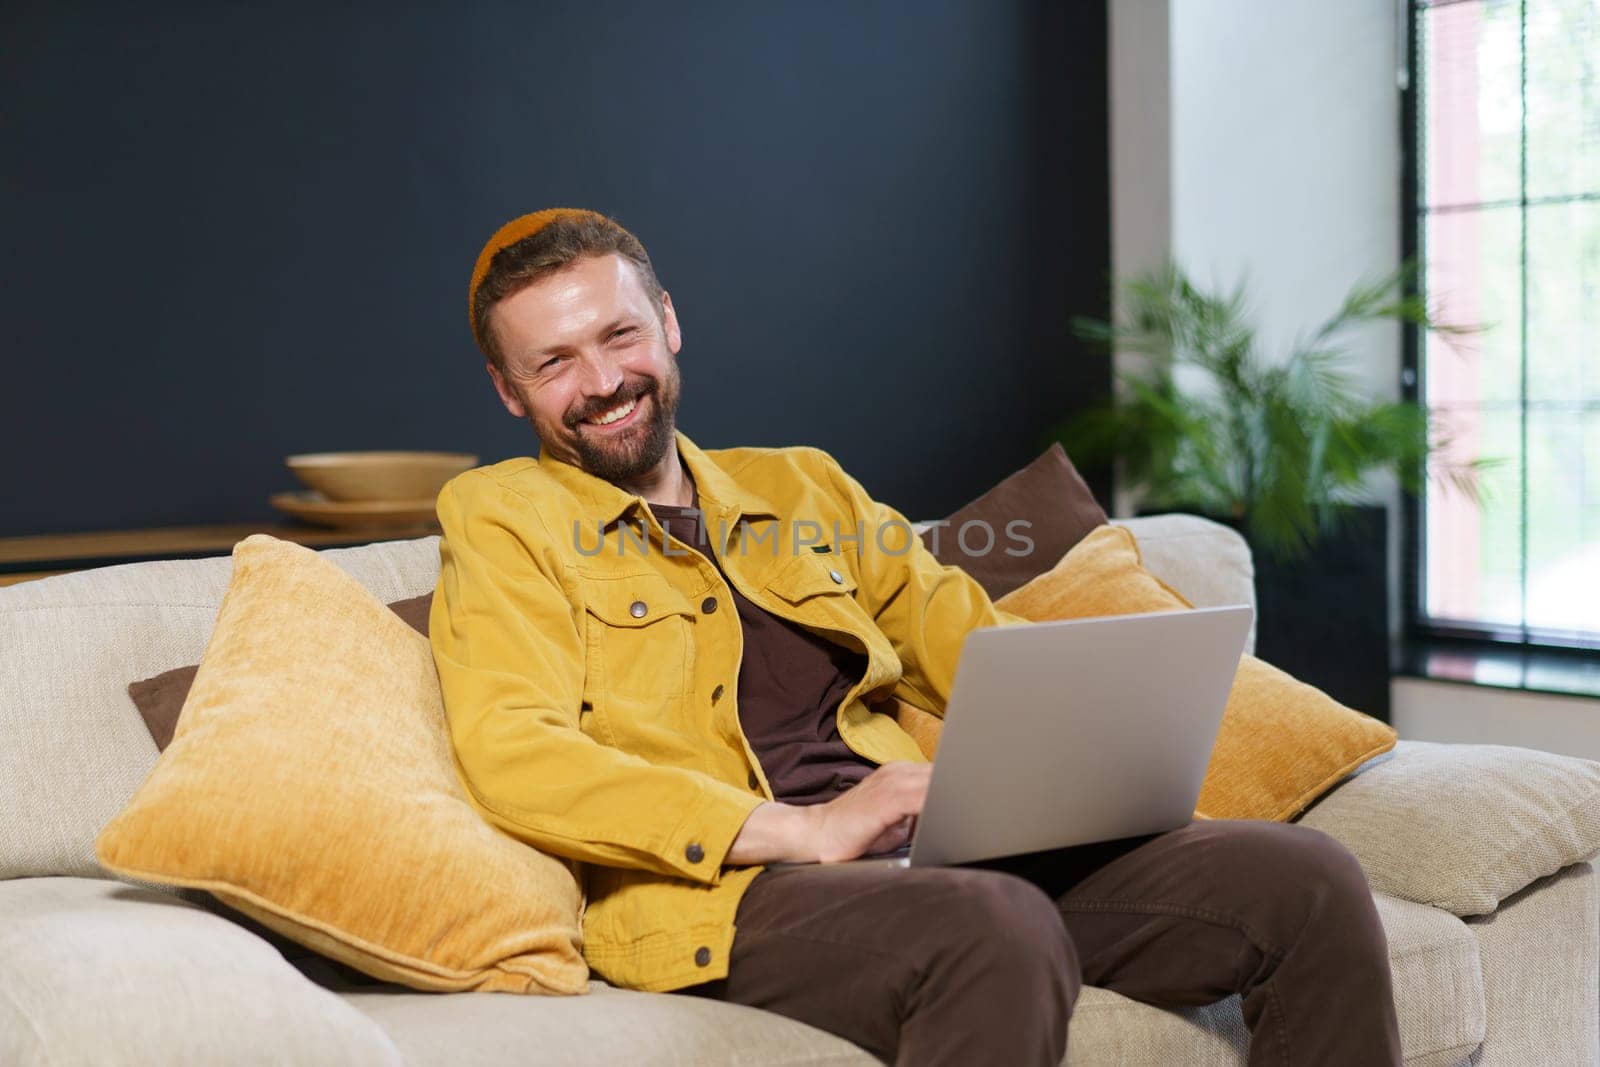 Happy and productive work-from-home scenario. Young man is seen sitting comfortably on sofa, smiling contentedly as he works on his laptop. by LipikStockMedia